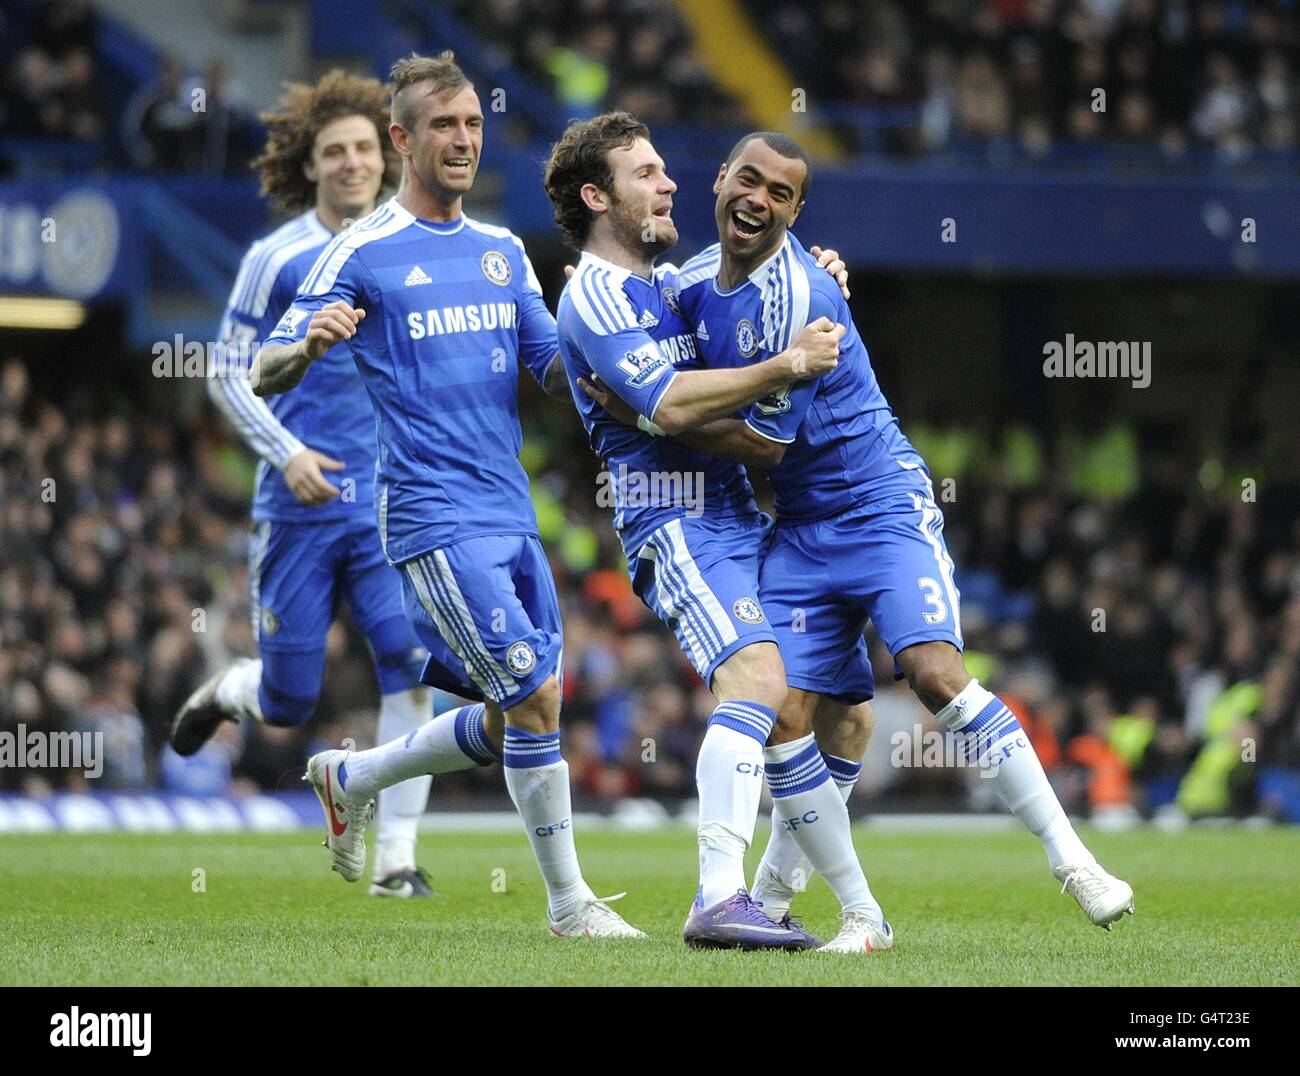 Soccer - Barclays Premier League - Chelsea v Fulham - Stamford Bridge. Chelsea's Juan Mata (2nd right) celebrates with his team mate Ashley Cole (right) after scoring the first goal of the game Stock Photo